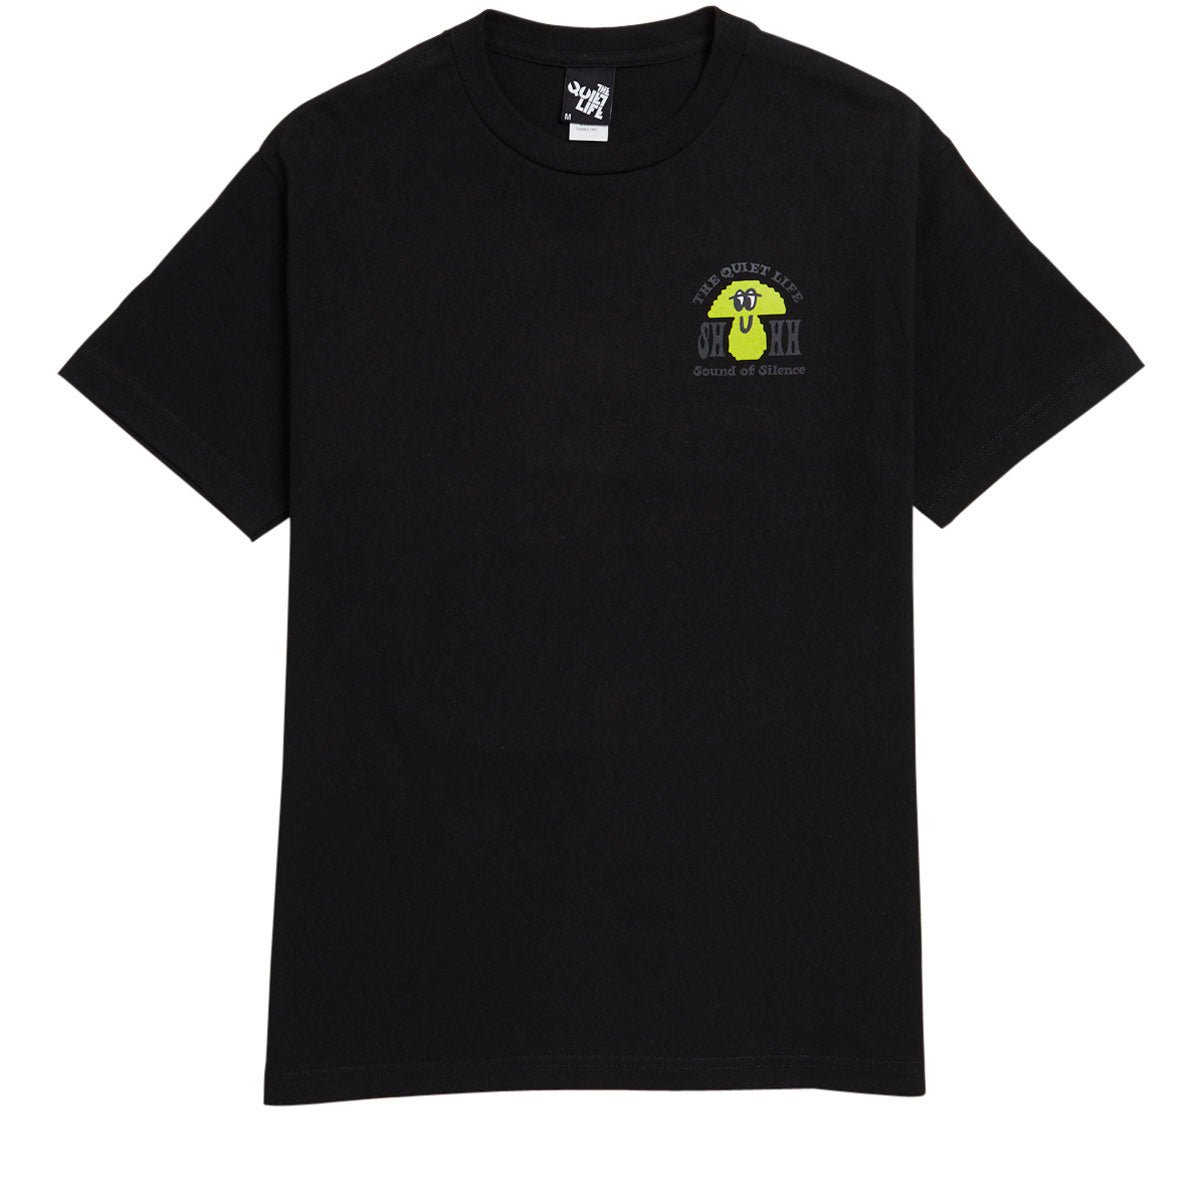 The Quiet Life Sound of Silence T-Shirt - Black image 2